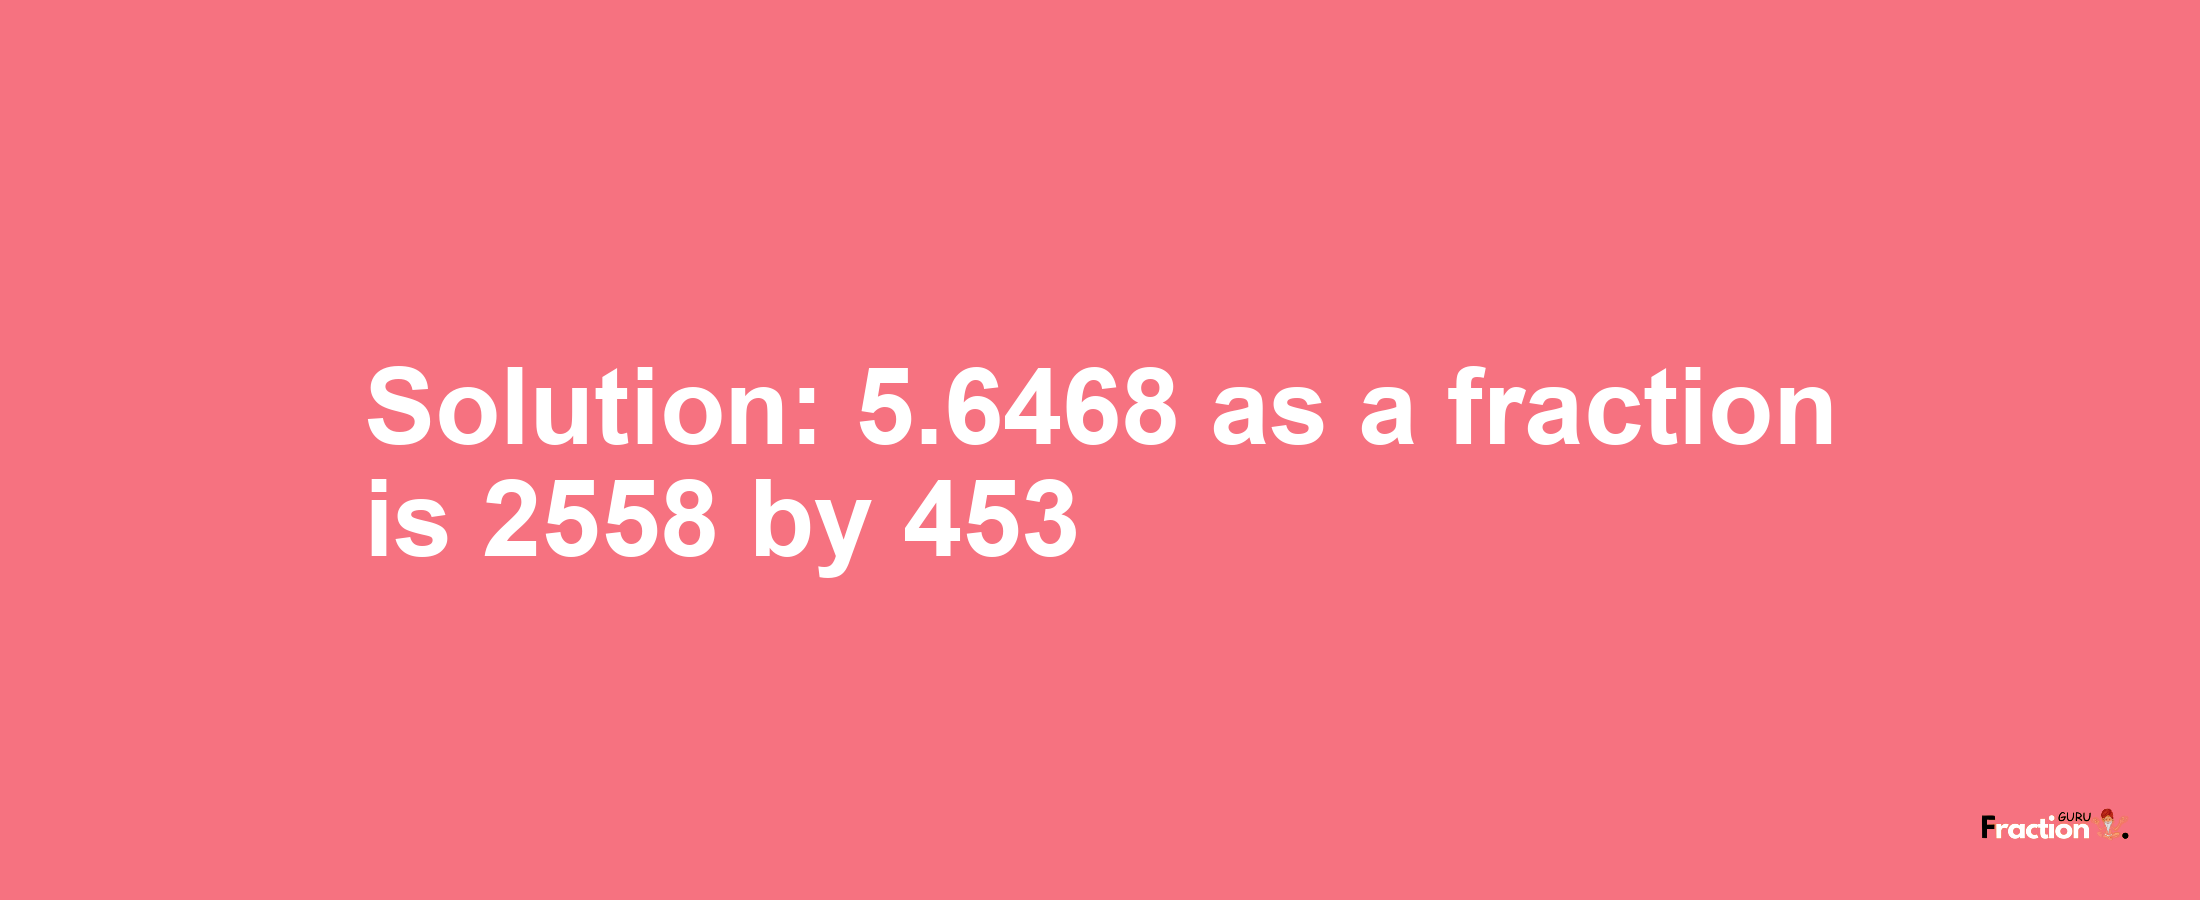 Solution:5.6468 as a fraction is 2558/453